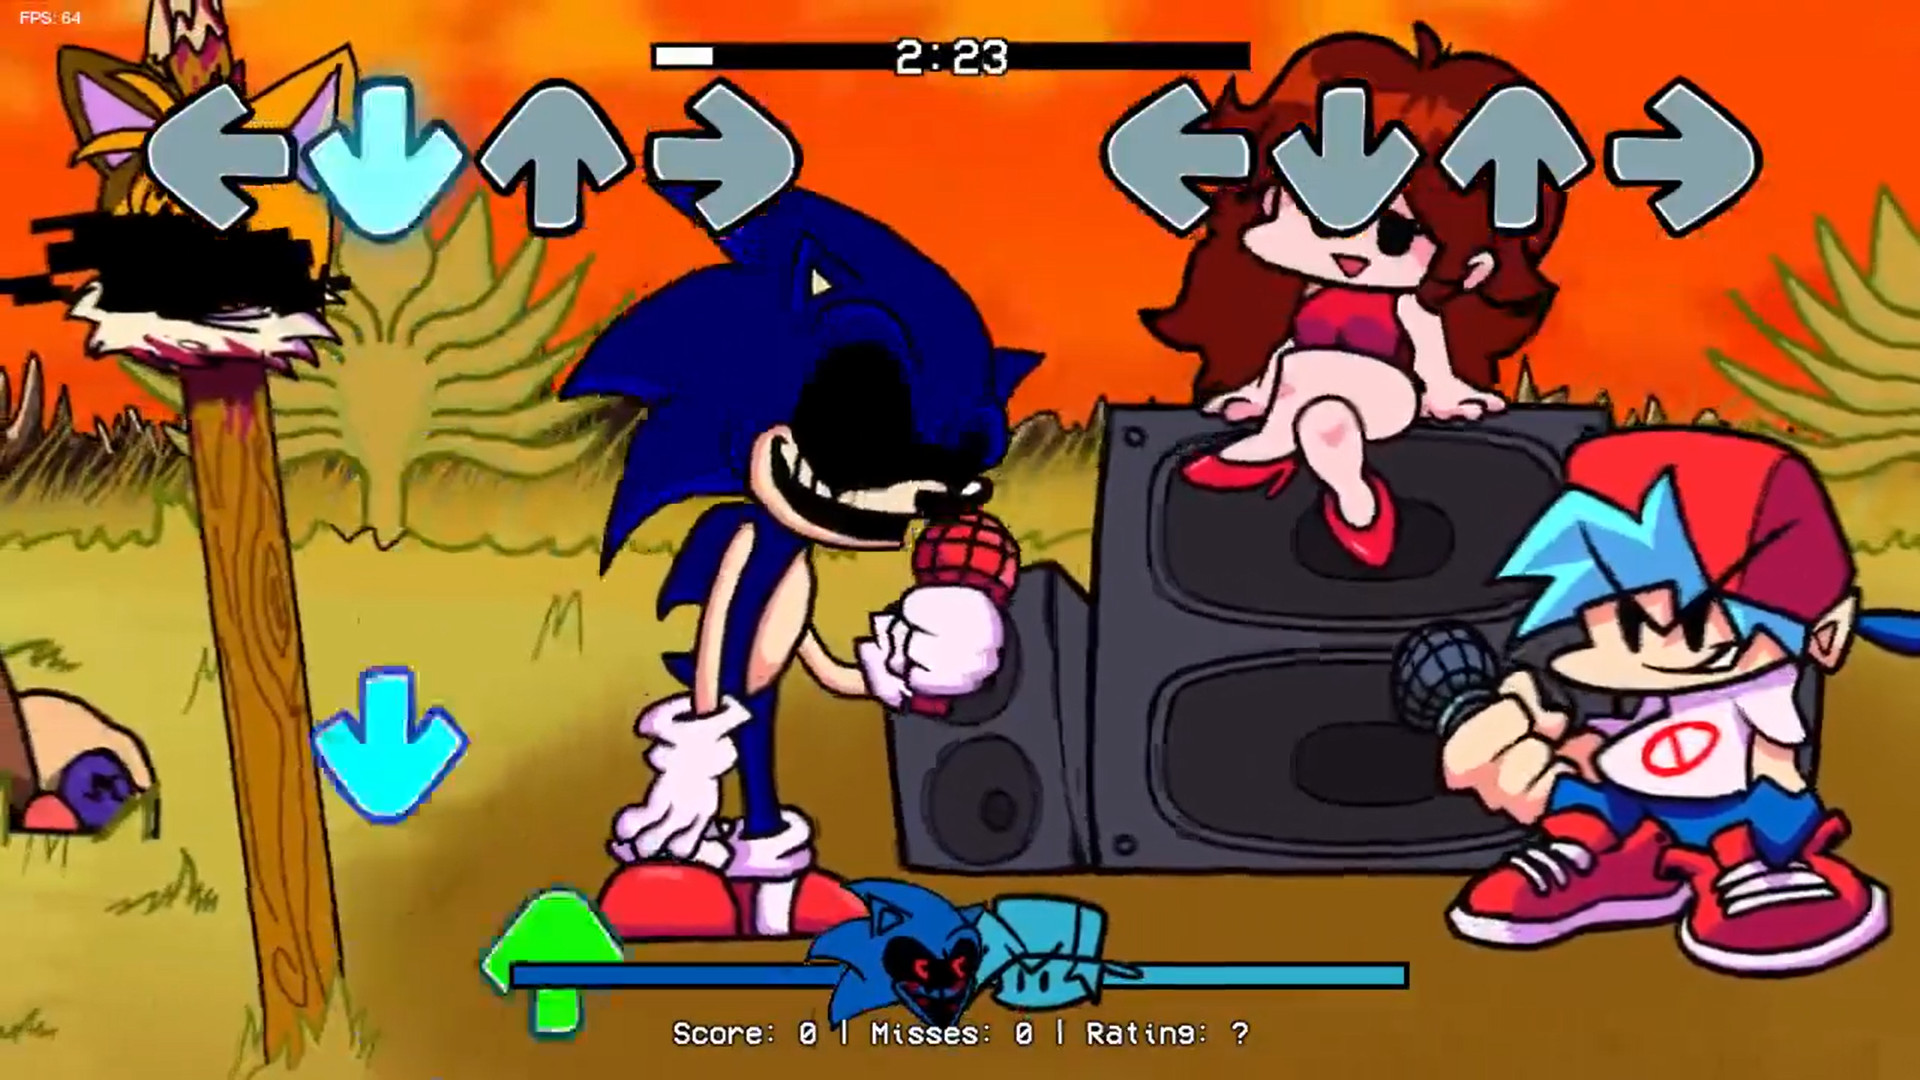 Fnf vs Sonic.exe 2.5 unofficial demo [Friday Night Funkin'] [Mods]